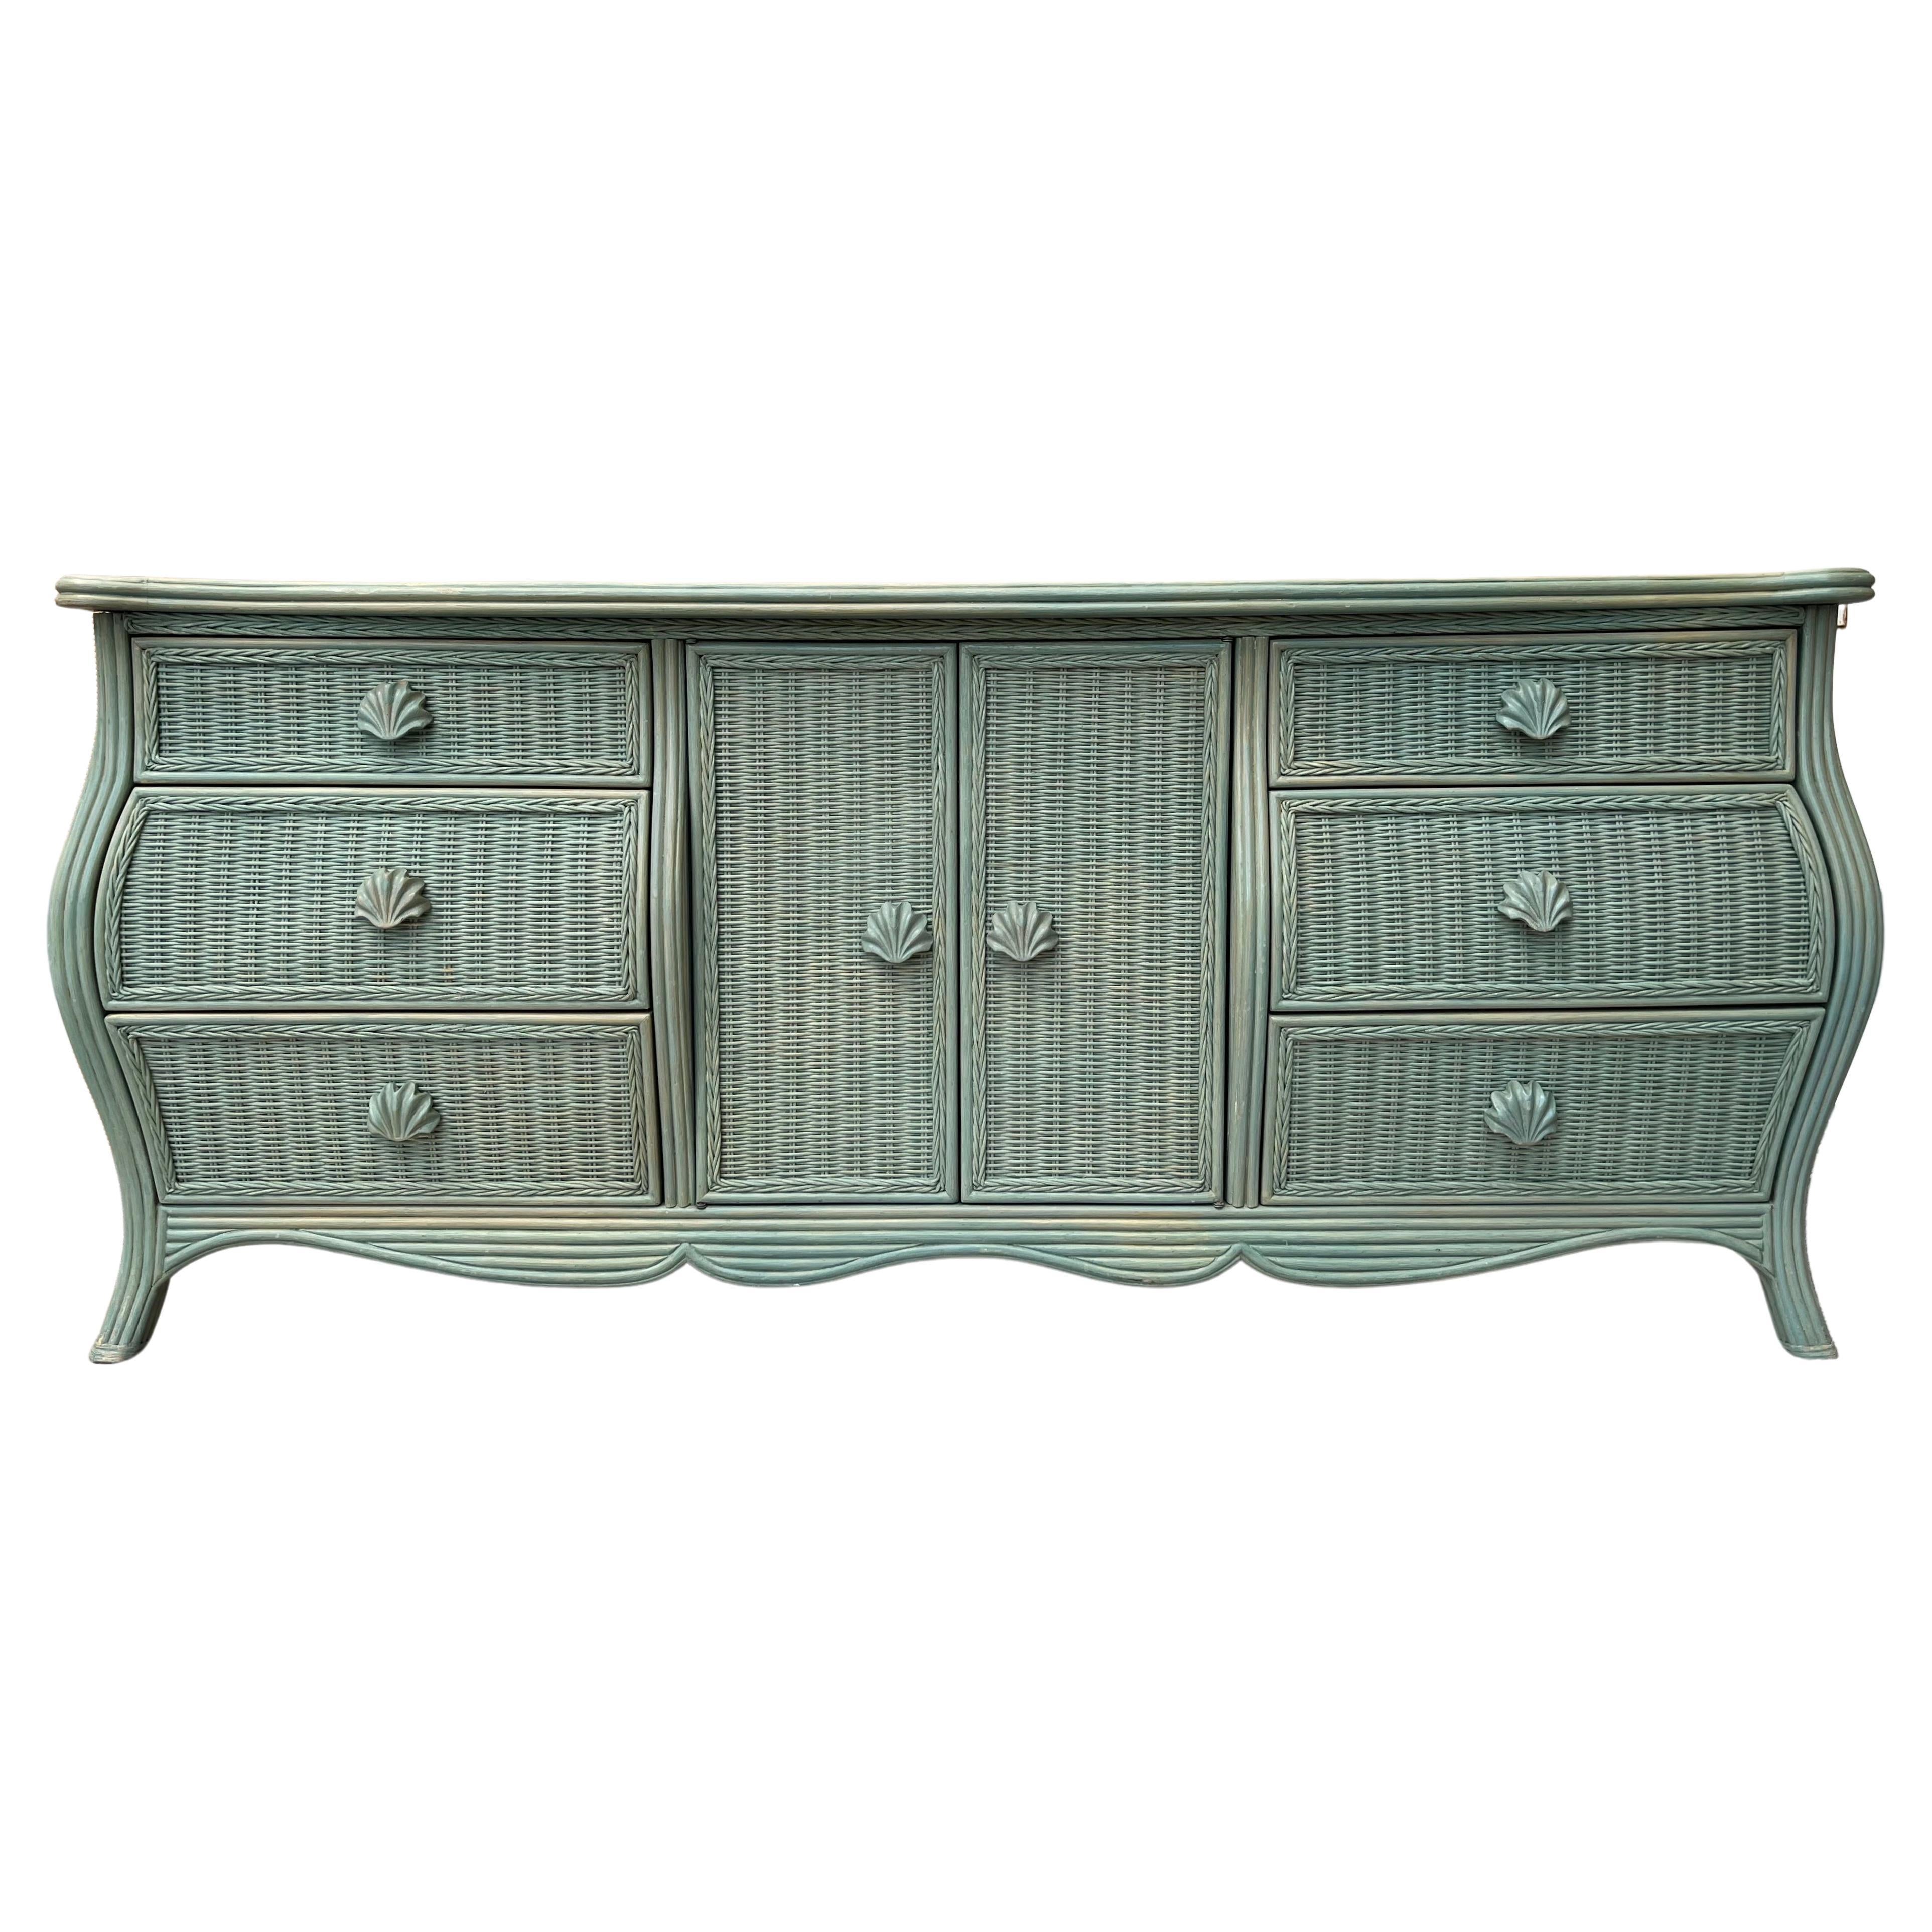 Coastal Style Pencil Reed and Wicker Dresser by Whitecraft Furniture